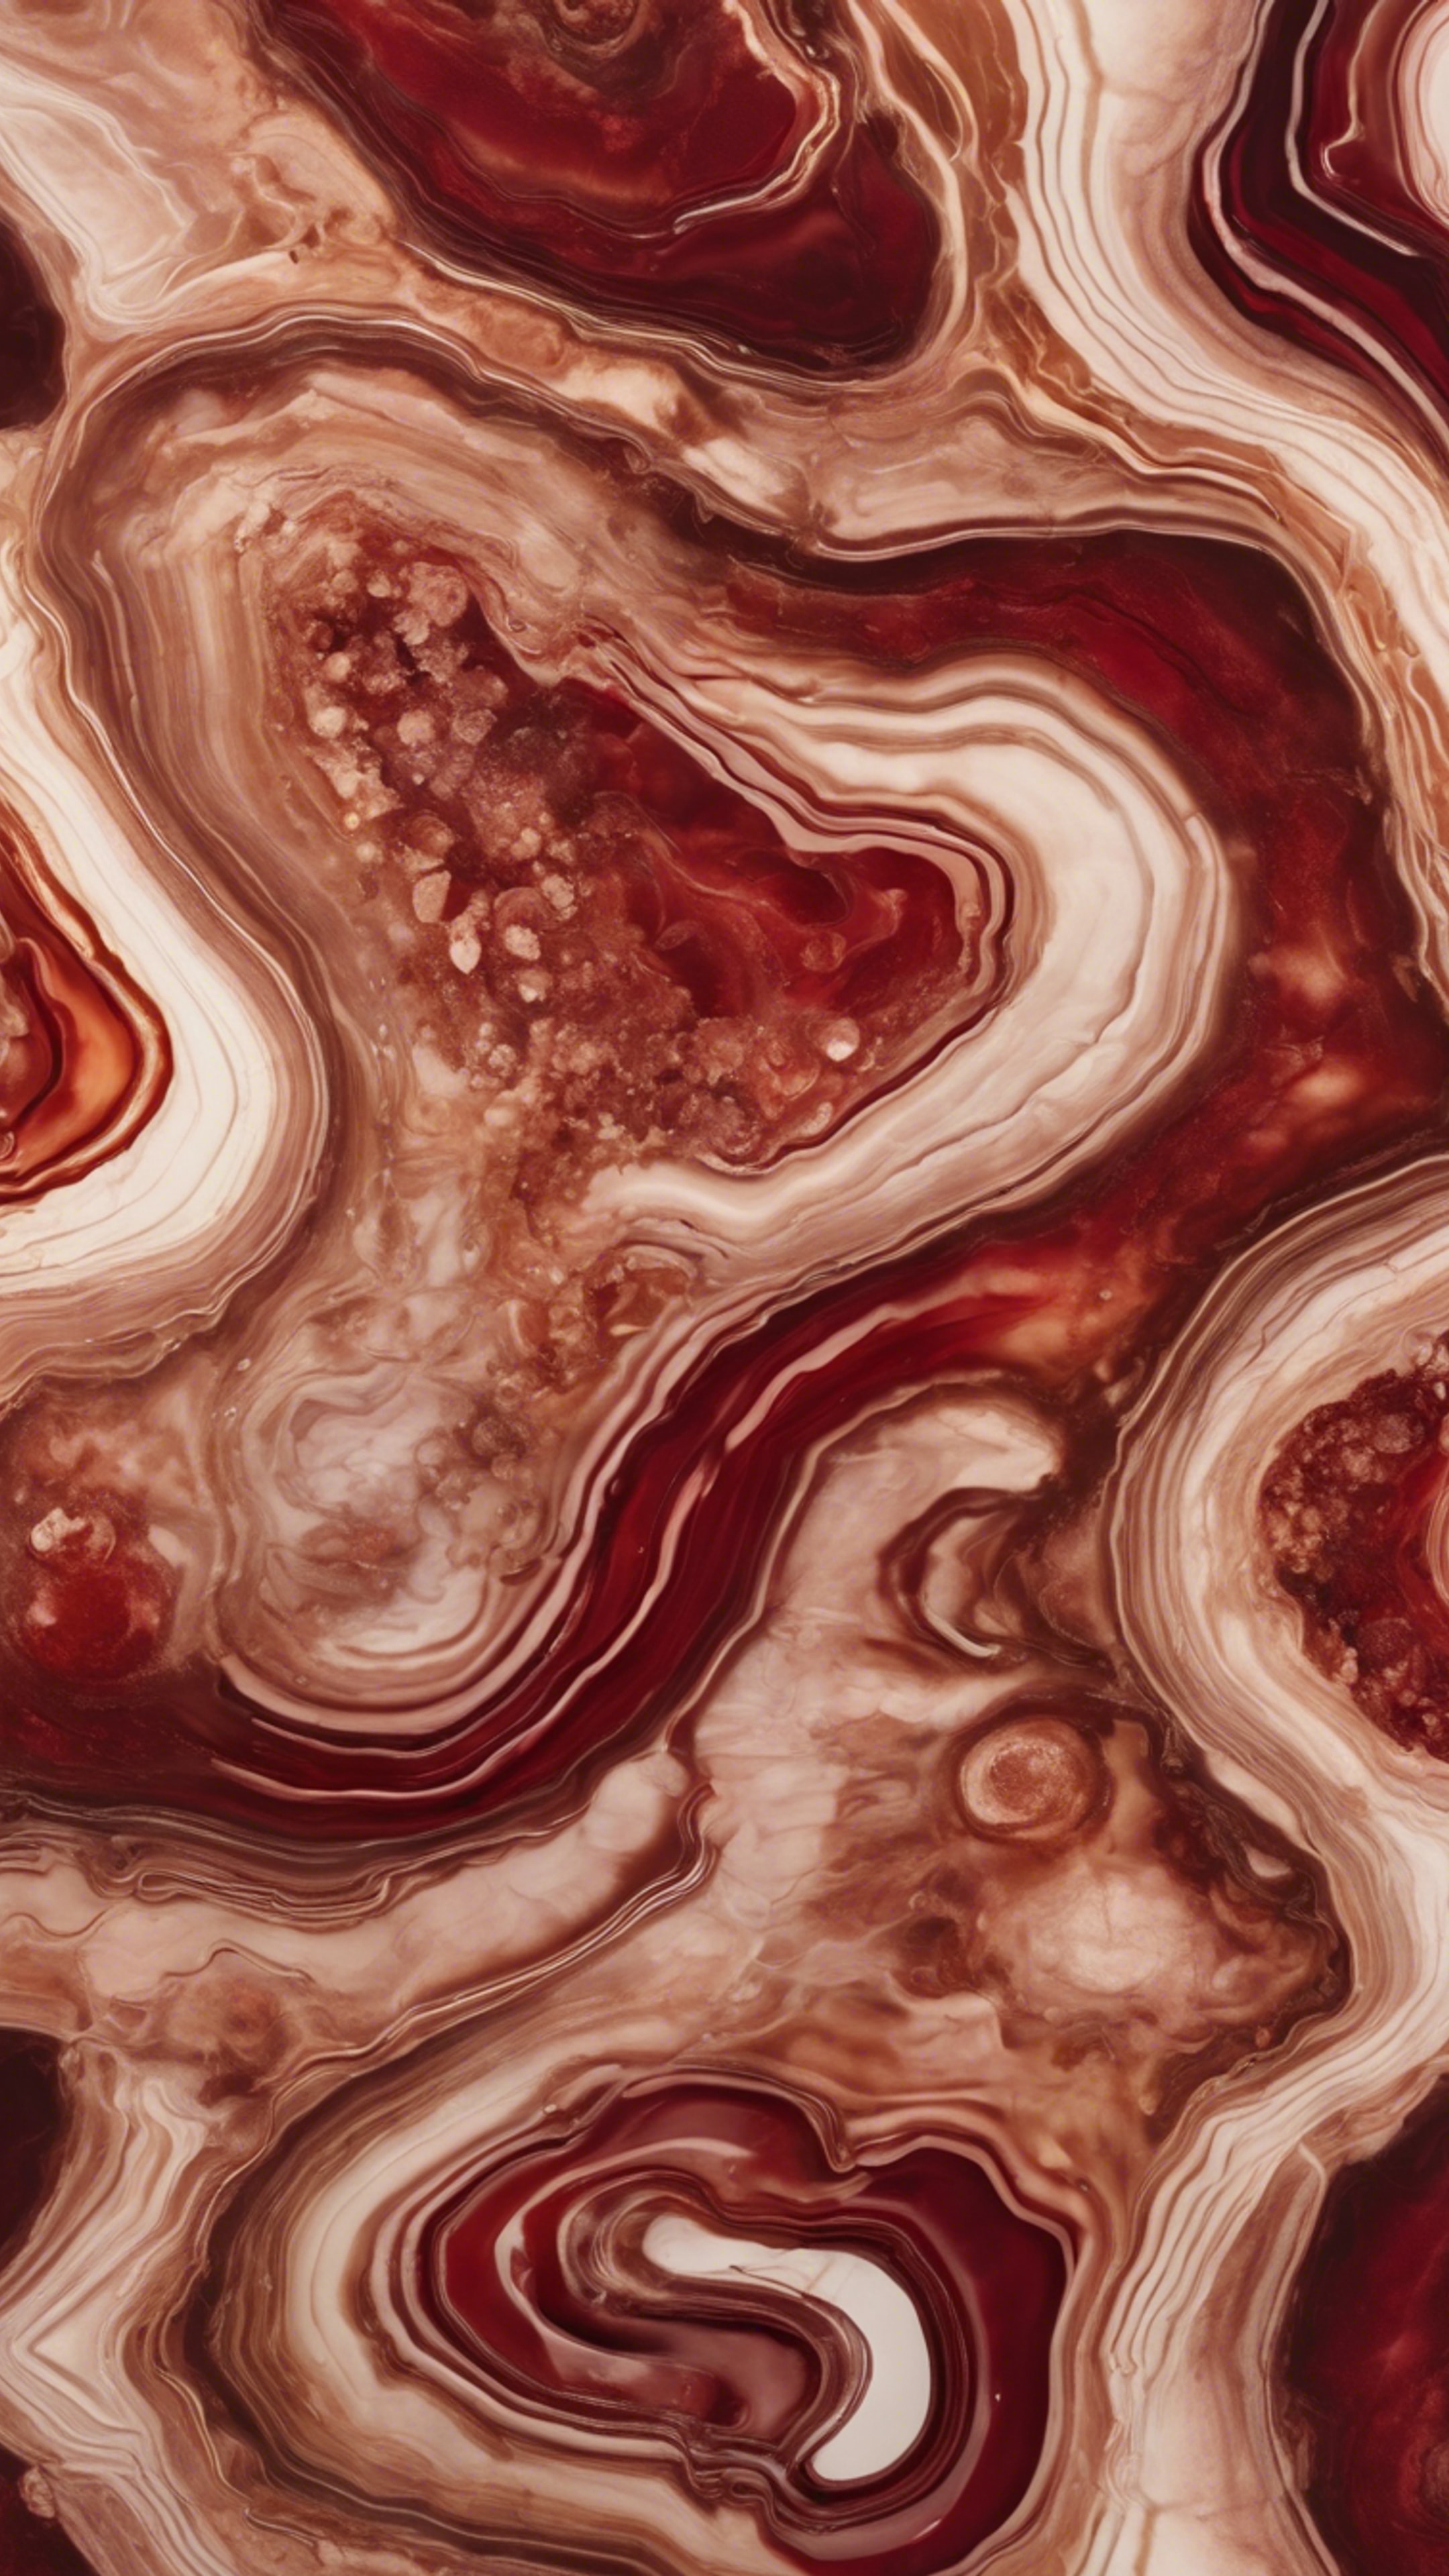 Grungy agate swirls in garnet red and sepia tones, forming a fascinating, abstract pattern. Fondo de pantalla[bb48f1c473e4473bbd4a]